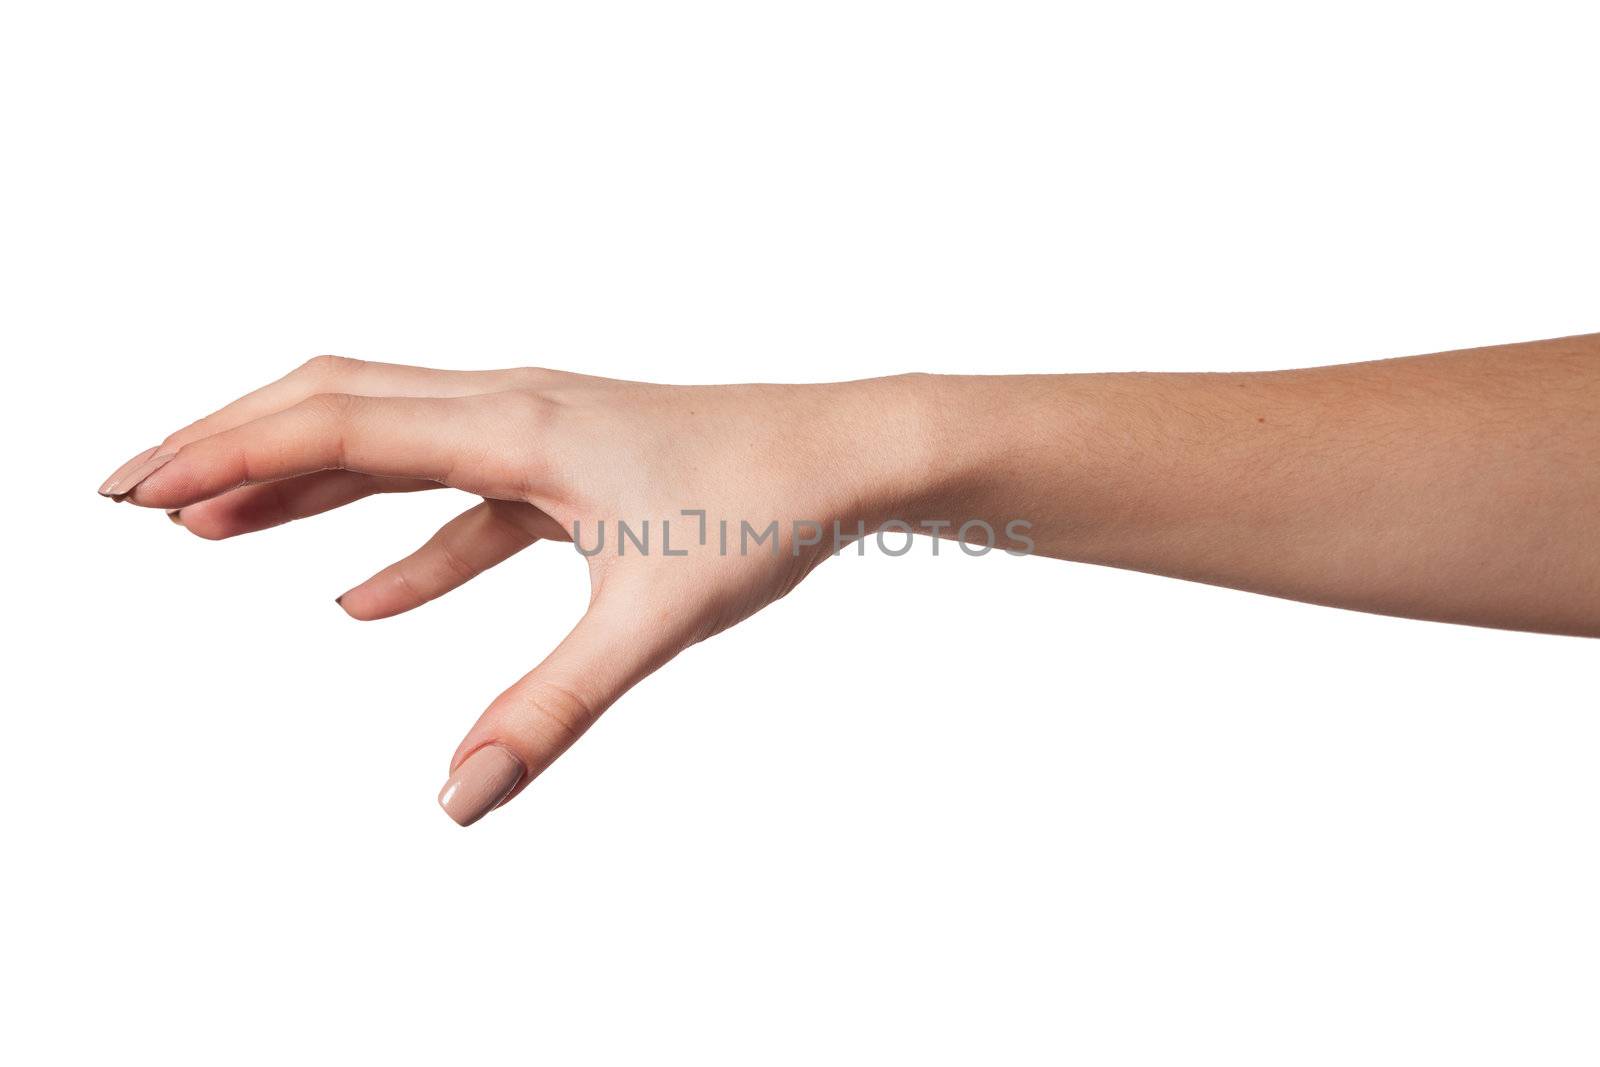 Well shaped Female hand reaching for something isolated on a white background